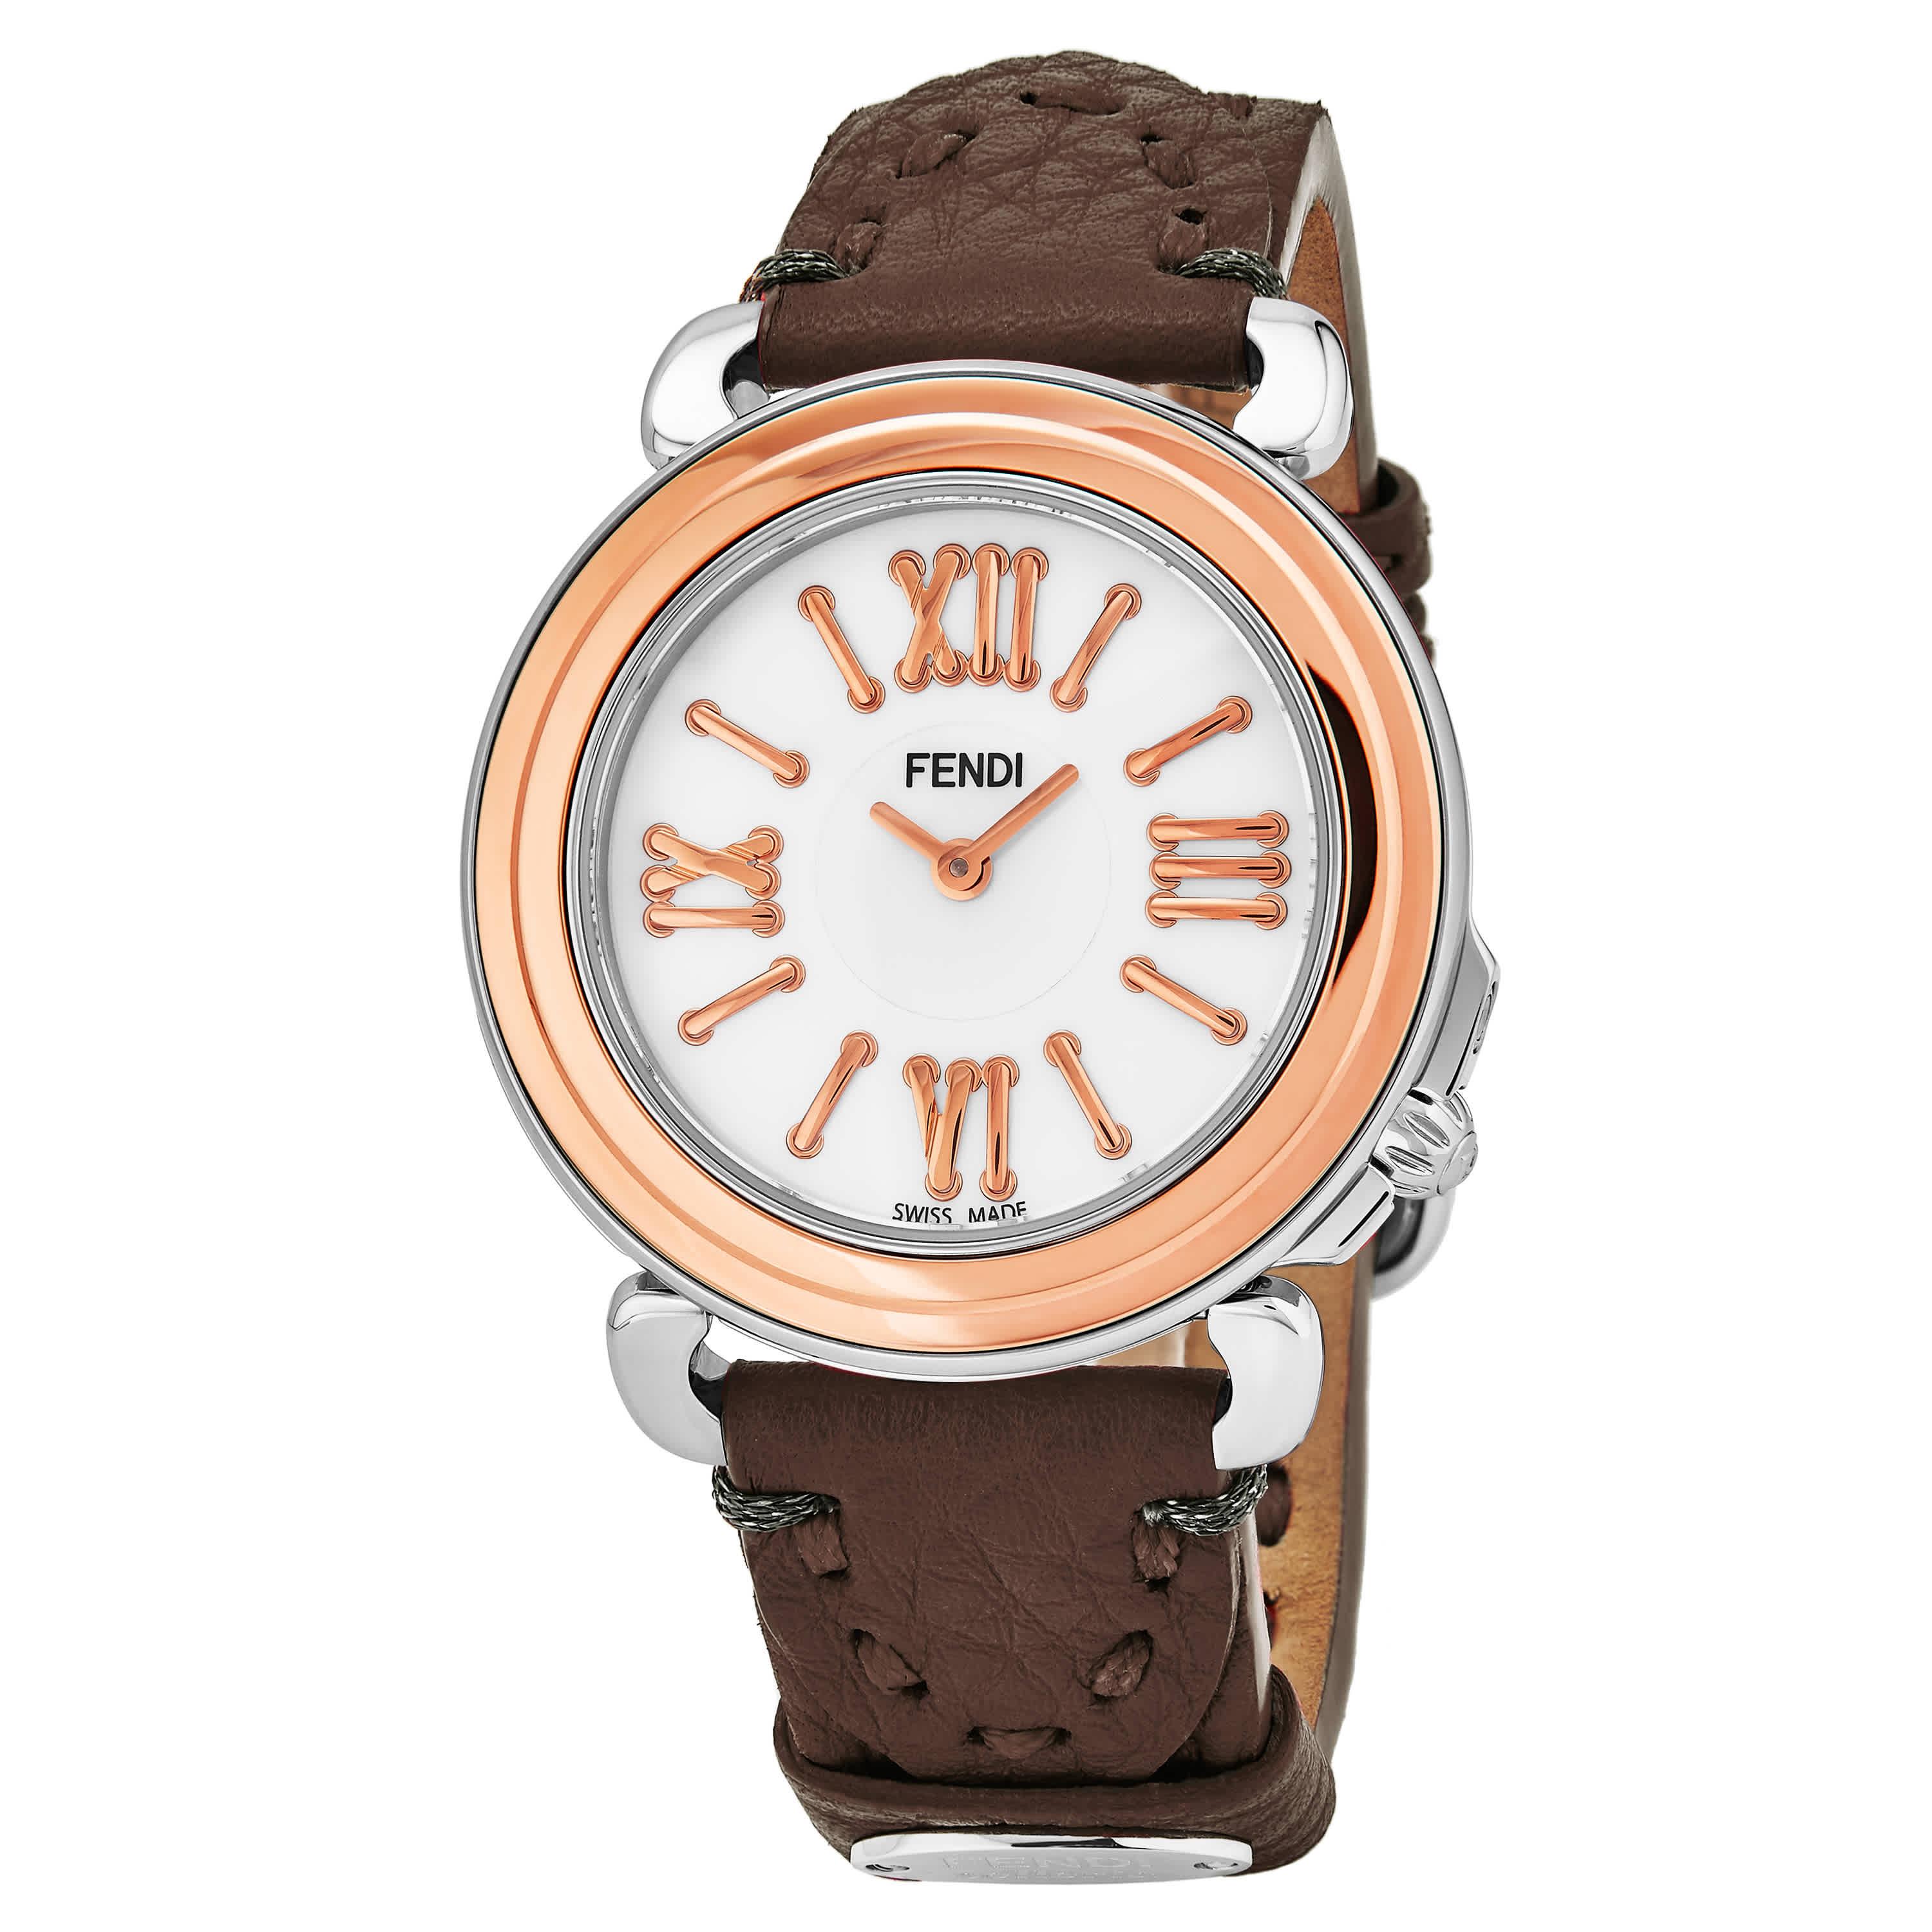 Fendi Leather Selleria Ladies Watch in Brown,Gold Tone,Mother of Pearl ...